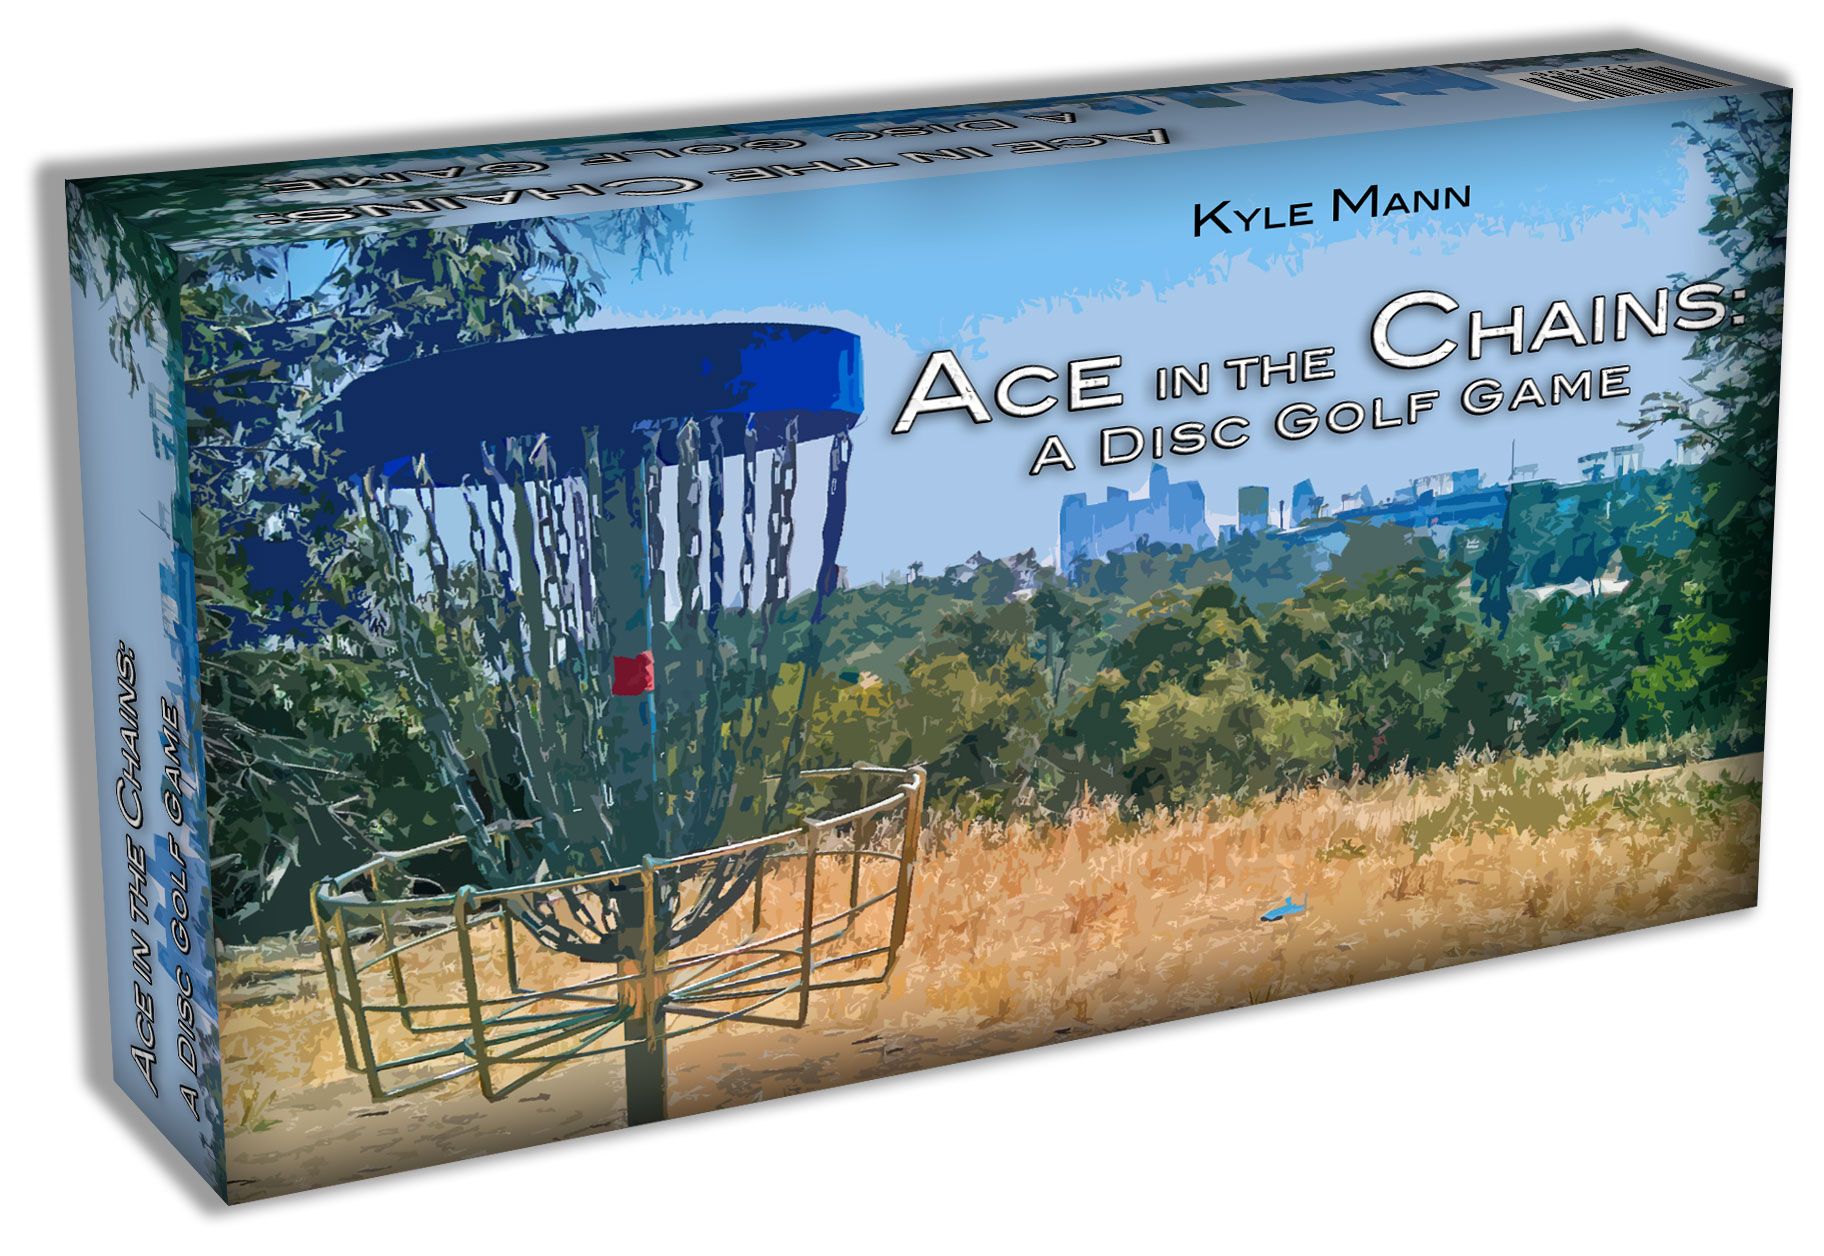 Ace in the Chains: A Disc Golf Game